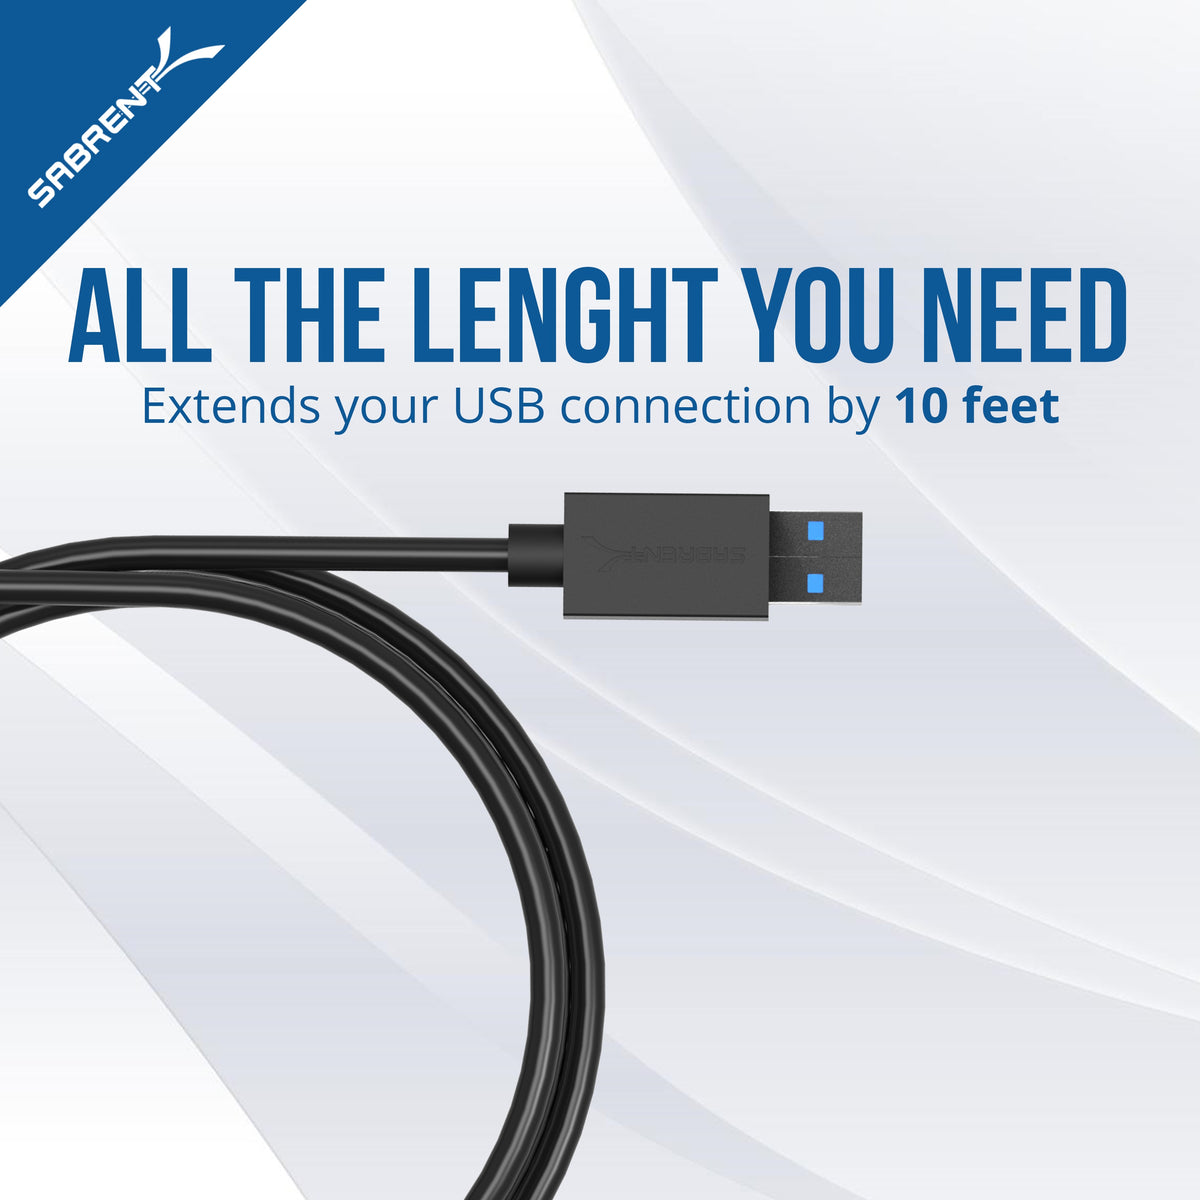 22AWG USB 3.0 Extension Cable - A-Male to A-Female [Black] 10 Feet